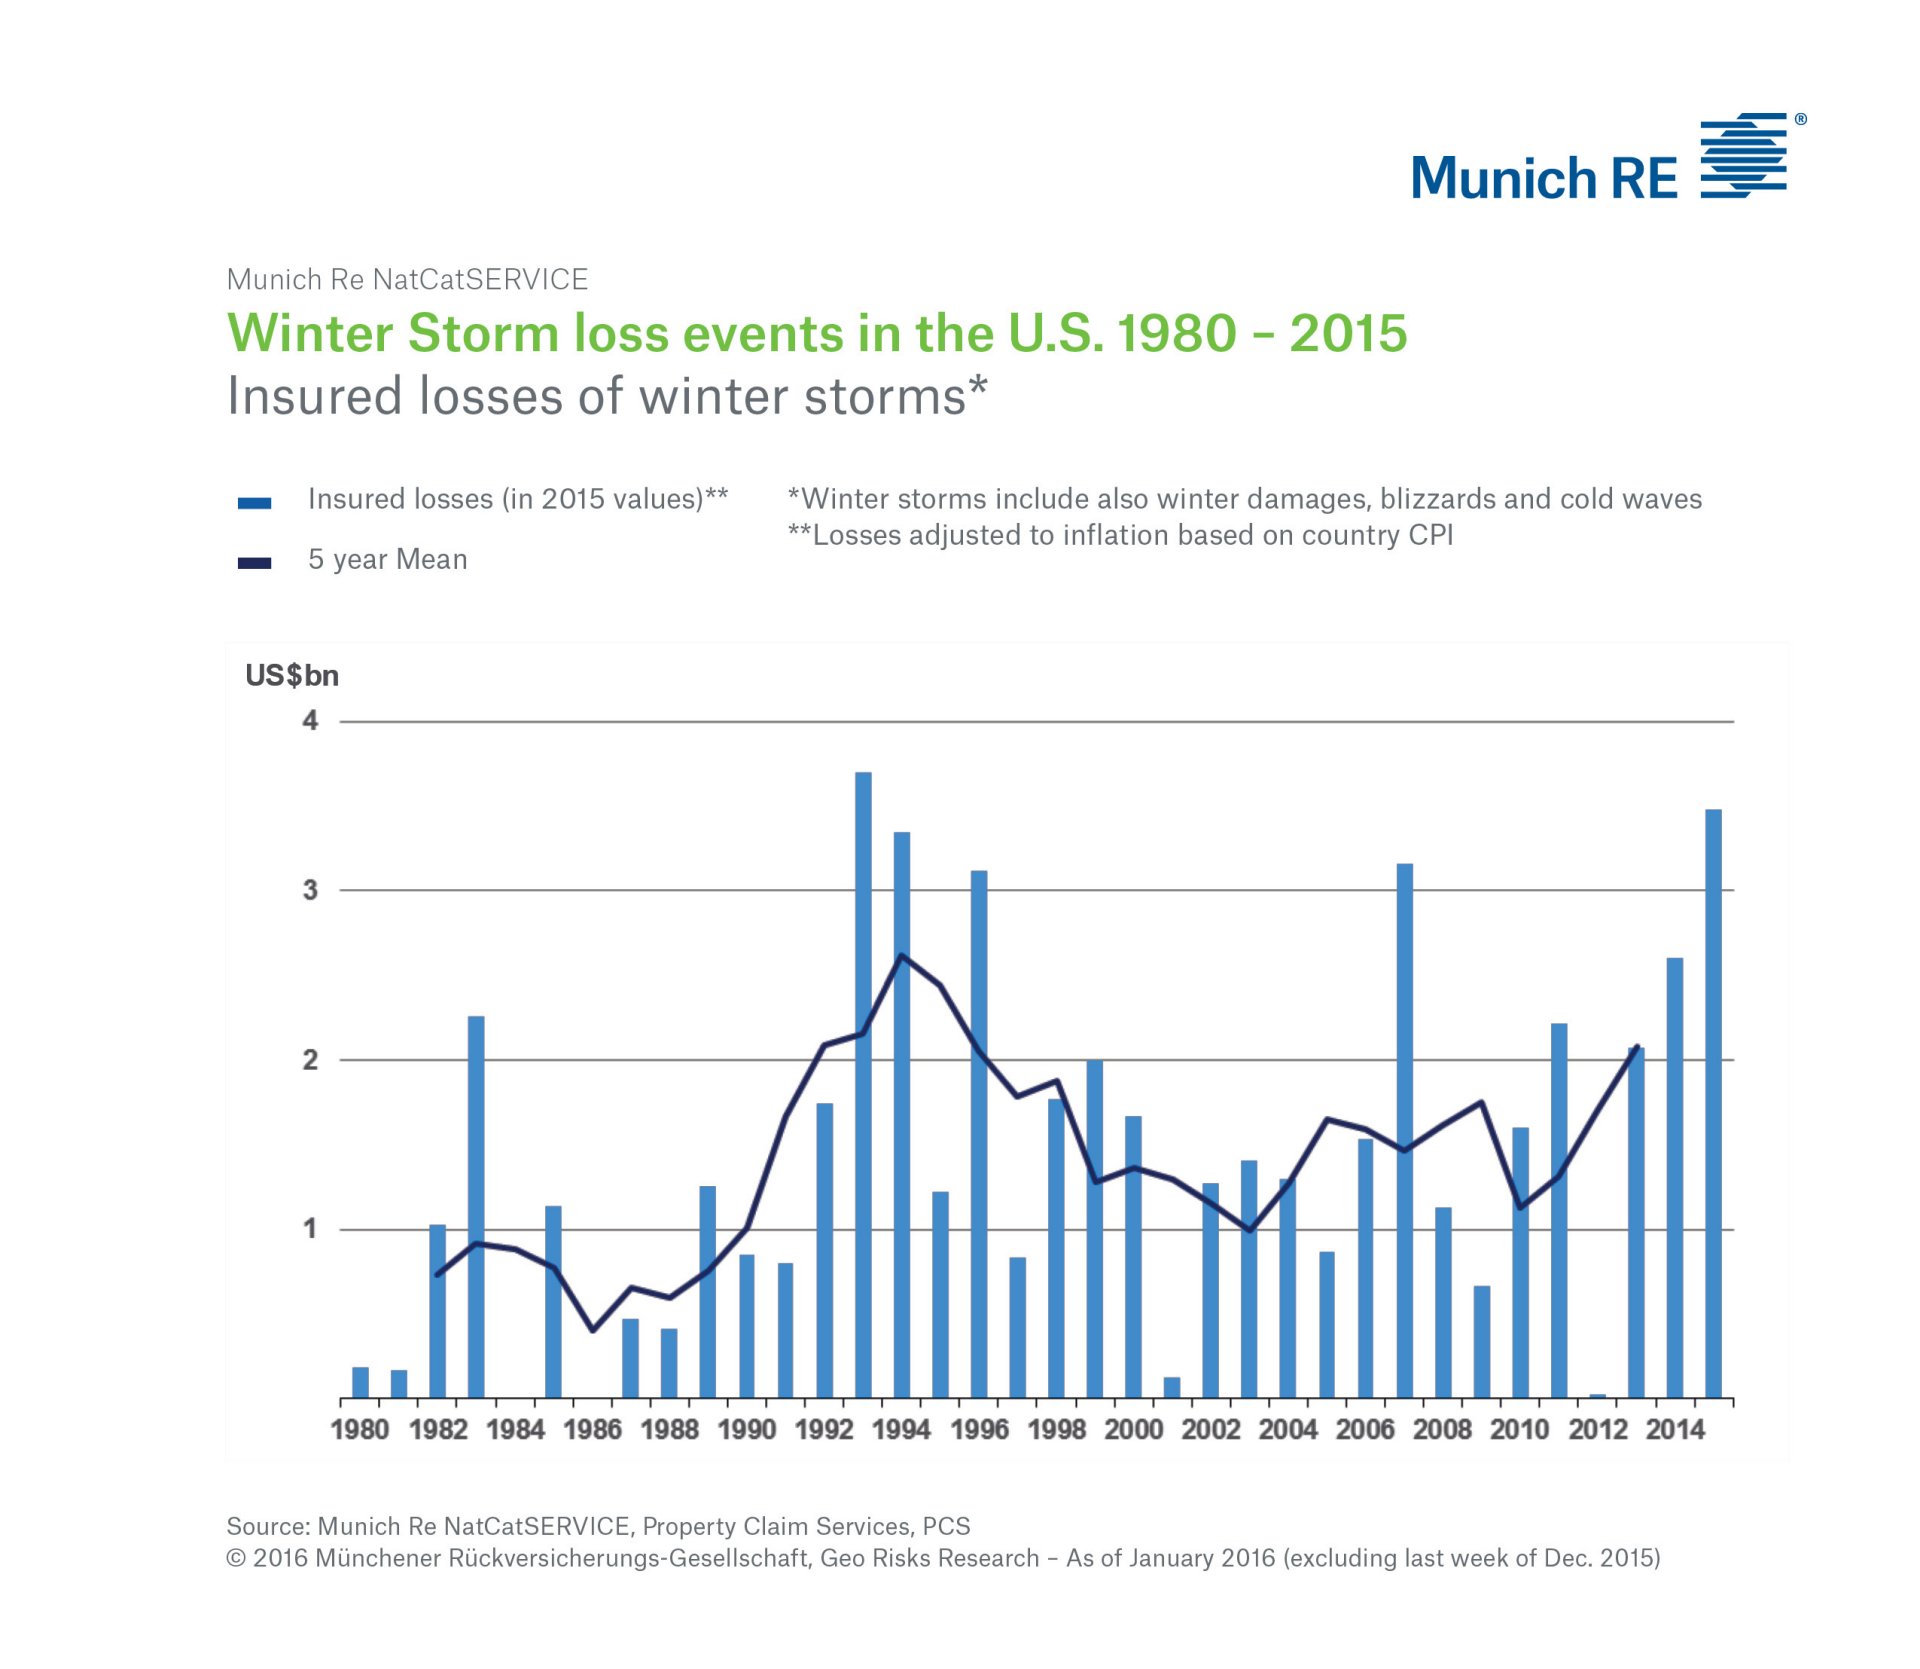 Winter Storm loss events in the U.S. 1980 - 2015